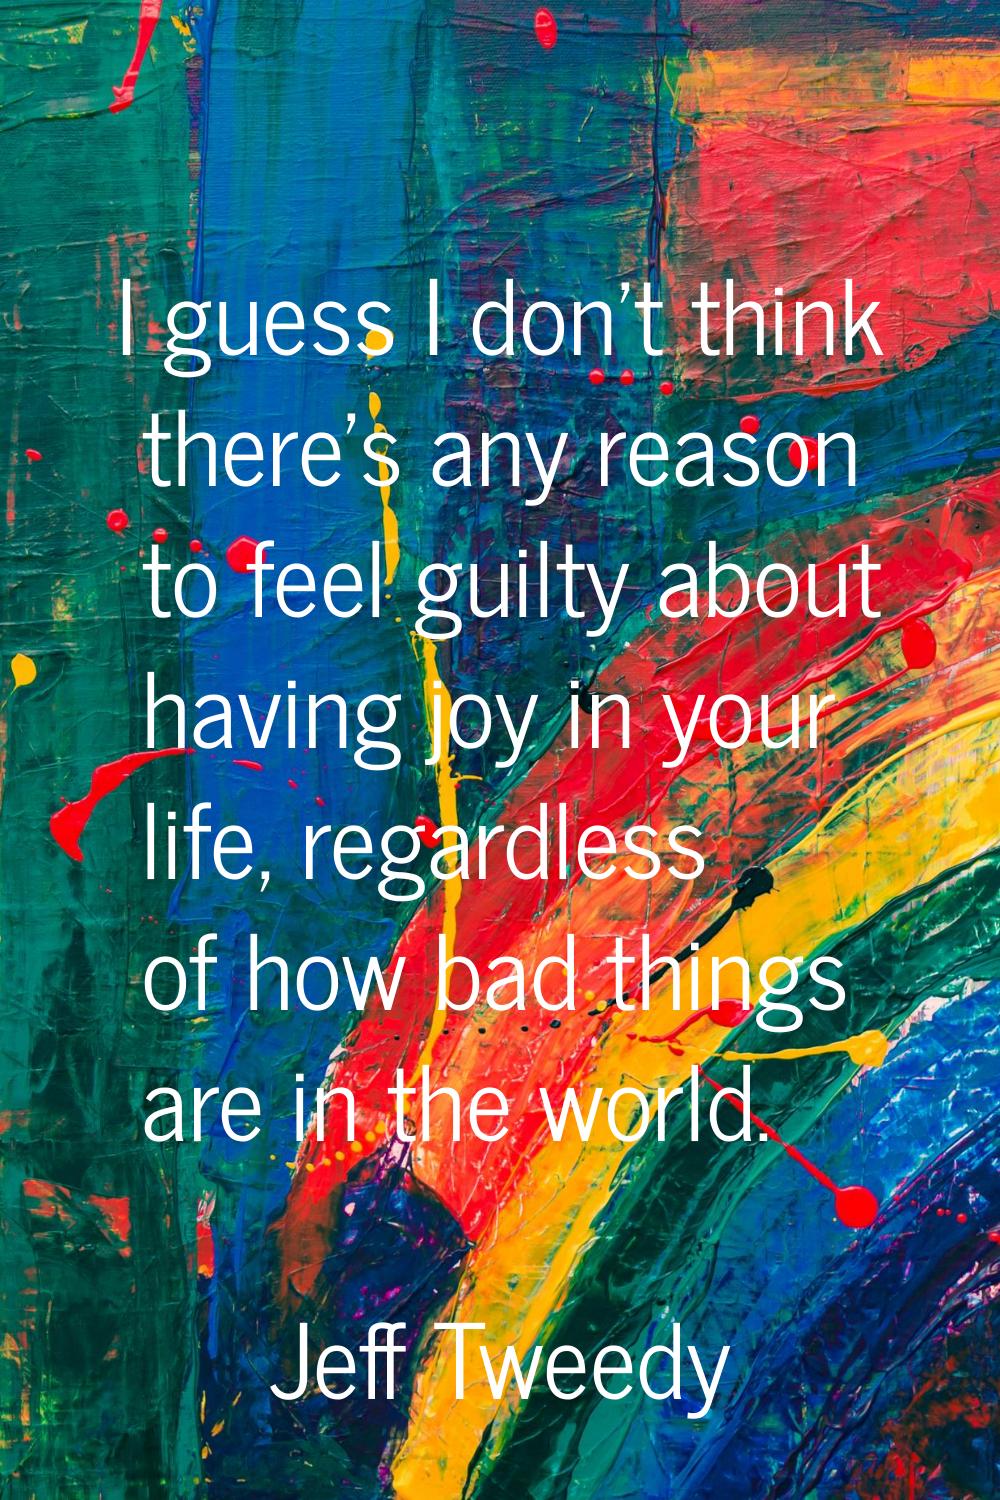 I guess I don't think there's any reason to feel guilty about having joy in your life, regardless o